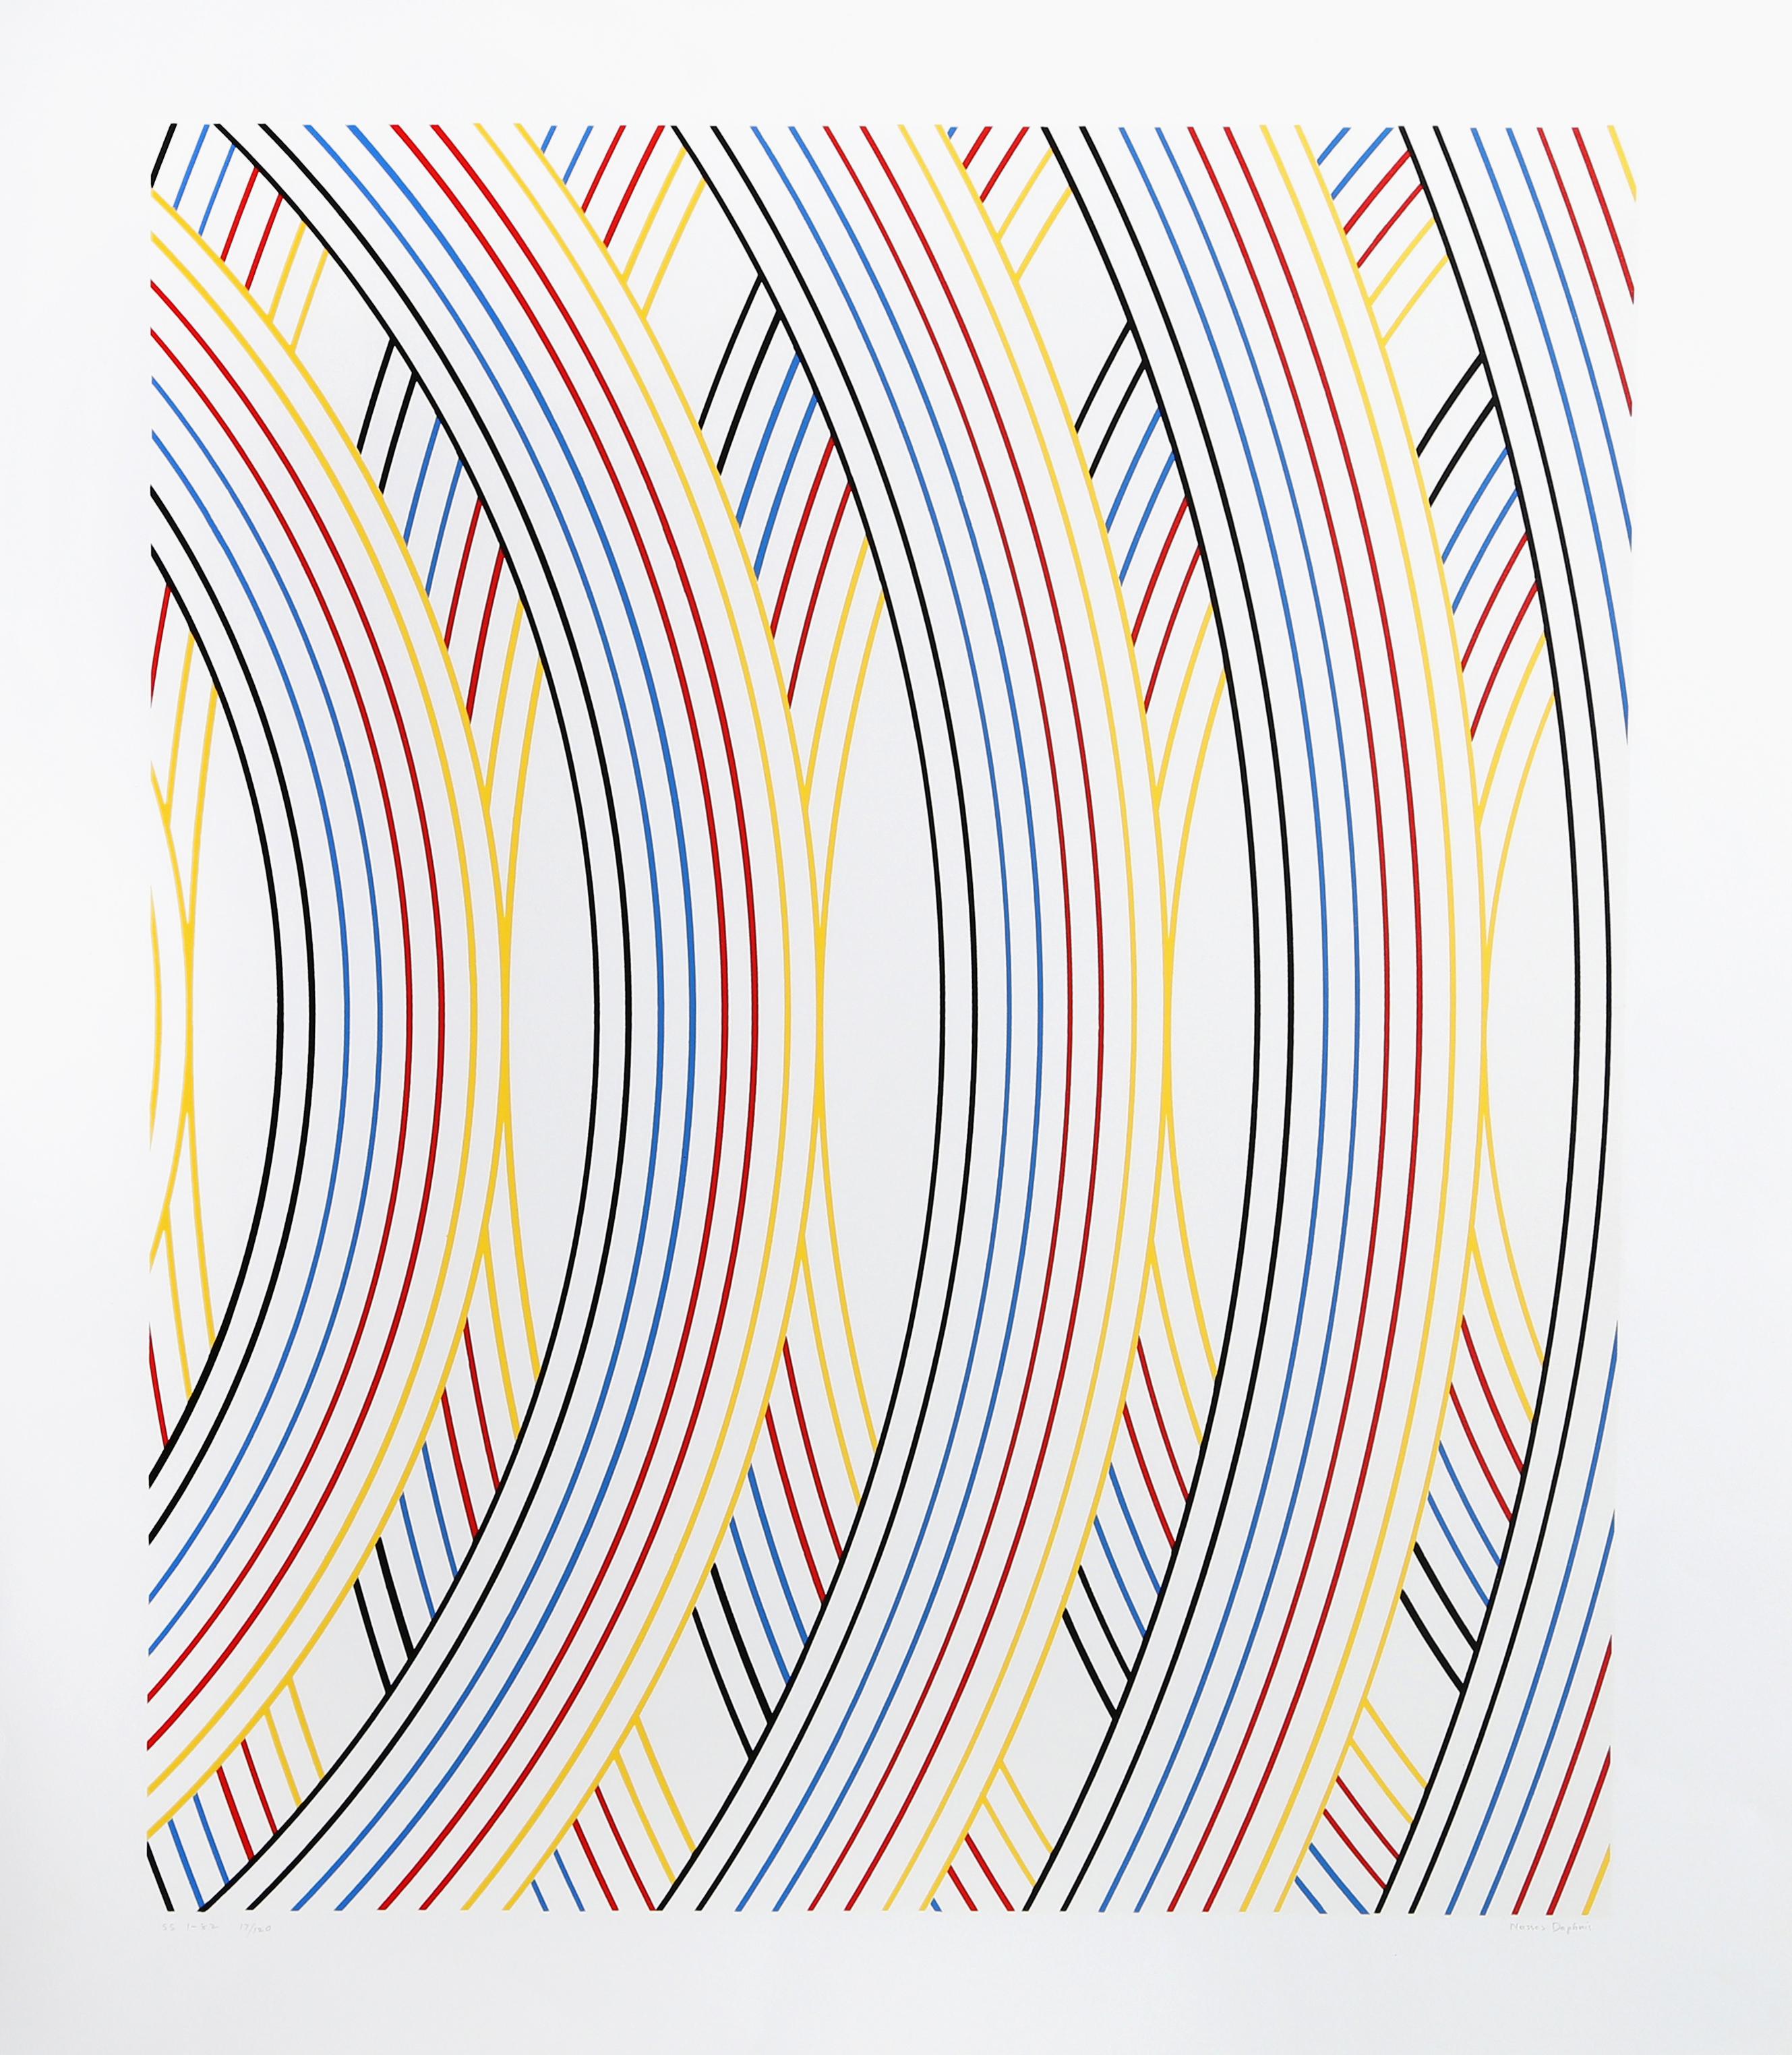 Artist:  Nassos Daphnis, Greek (1914 - 2010)
Title:  SS 1-82
Year:  1982
Medium:  Screenprint, signed and numbered in pencil
Edition:  120, PP 5, HC
Image: 28 x 23.5 inches
Size:  35.75  x 30 in. (90.81  x 76.2 cm)